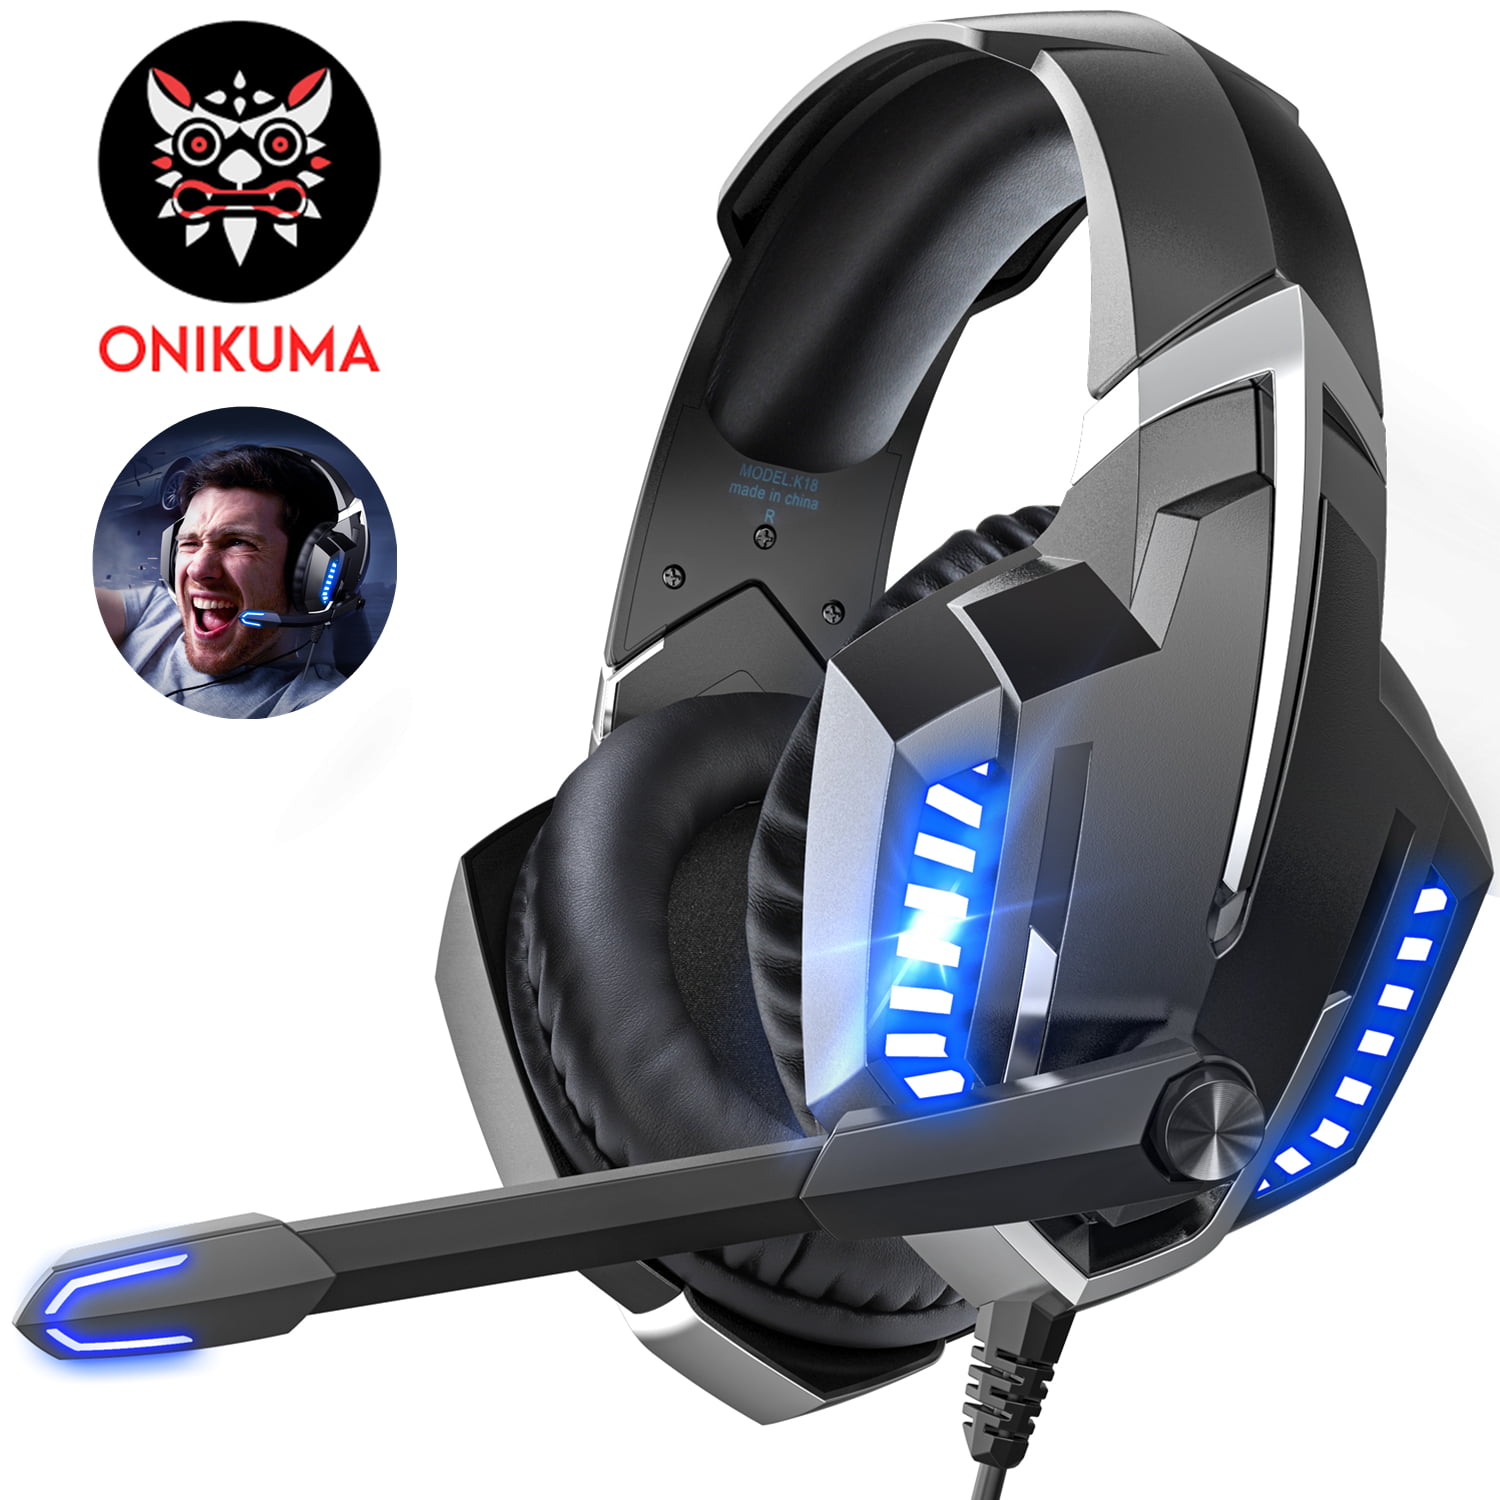 Bluetooth Connectivity Wireless Headsets Built-in Mic Bass Surround Sound Volume Control Breathable Earcups Foldable Led Light Gaming Headset-Black